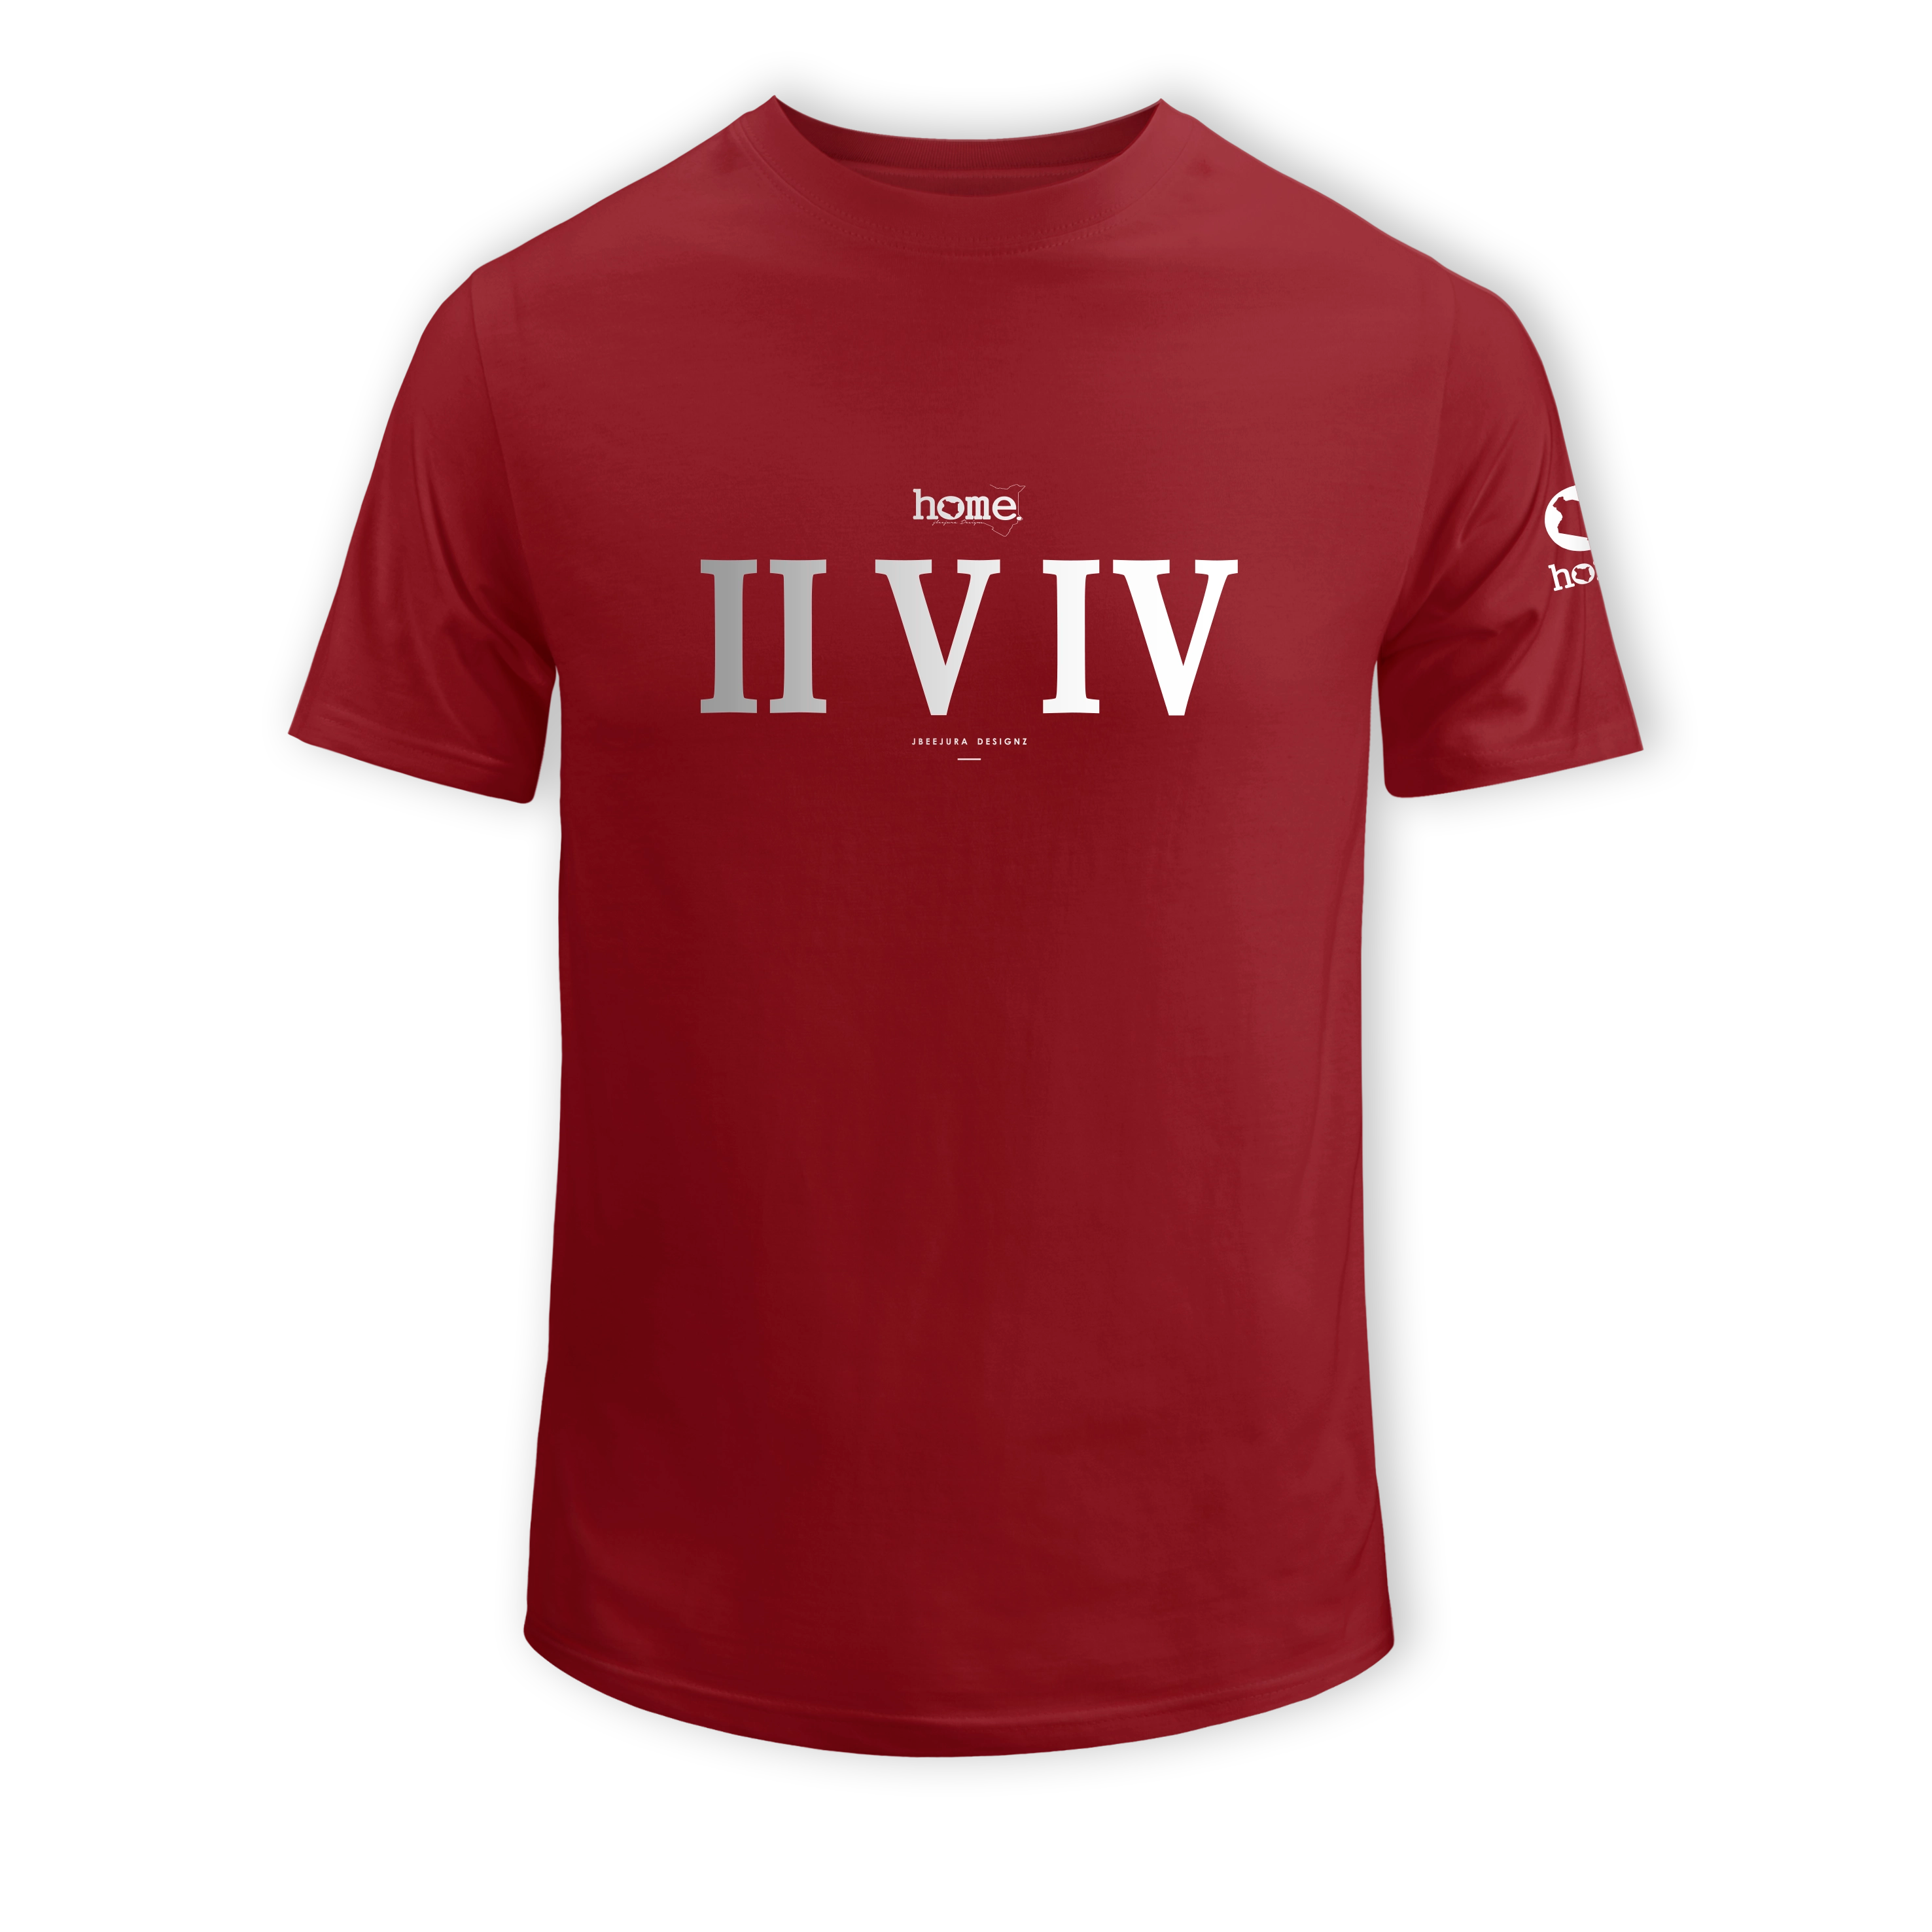 home_254 KIDS SHORT-SLEEVED MAROON RED T-SHIRT WITH A SILVER ROMAN NUMERALS PRINT – COTTON PLUS FABRIC